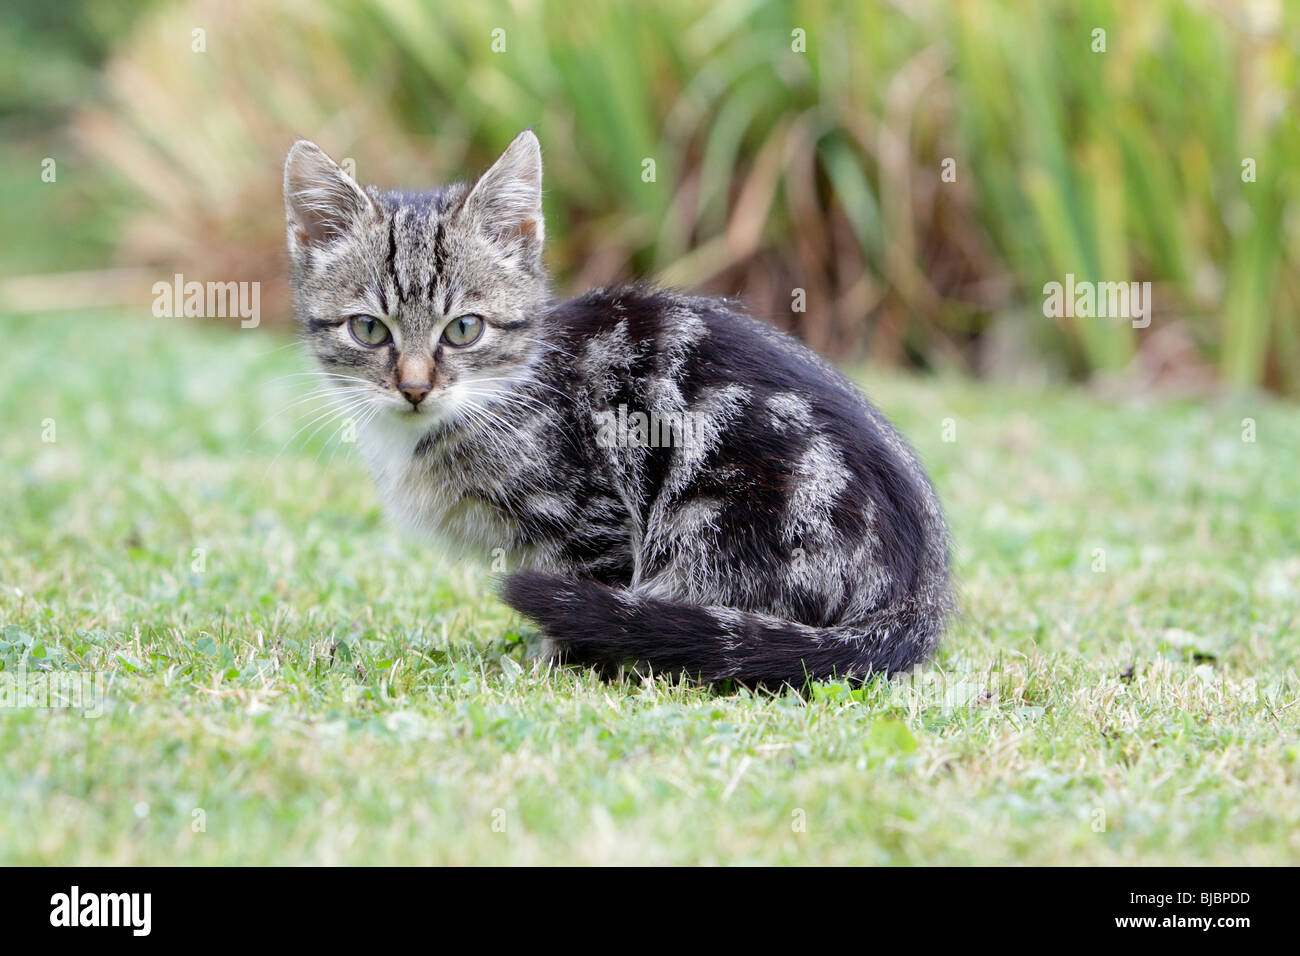 grey and black striped kitten